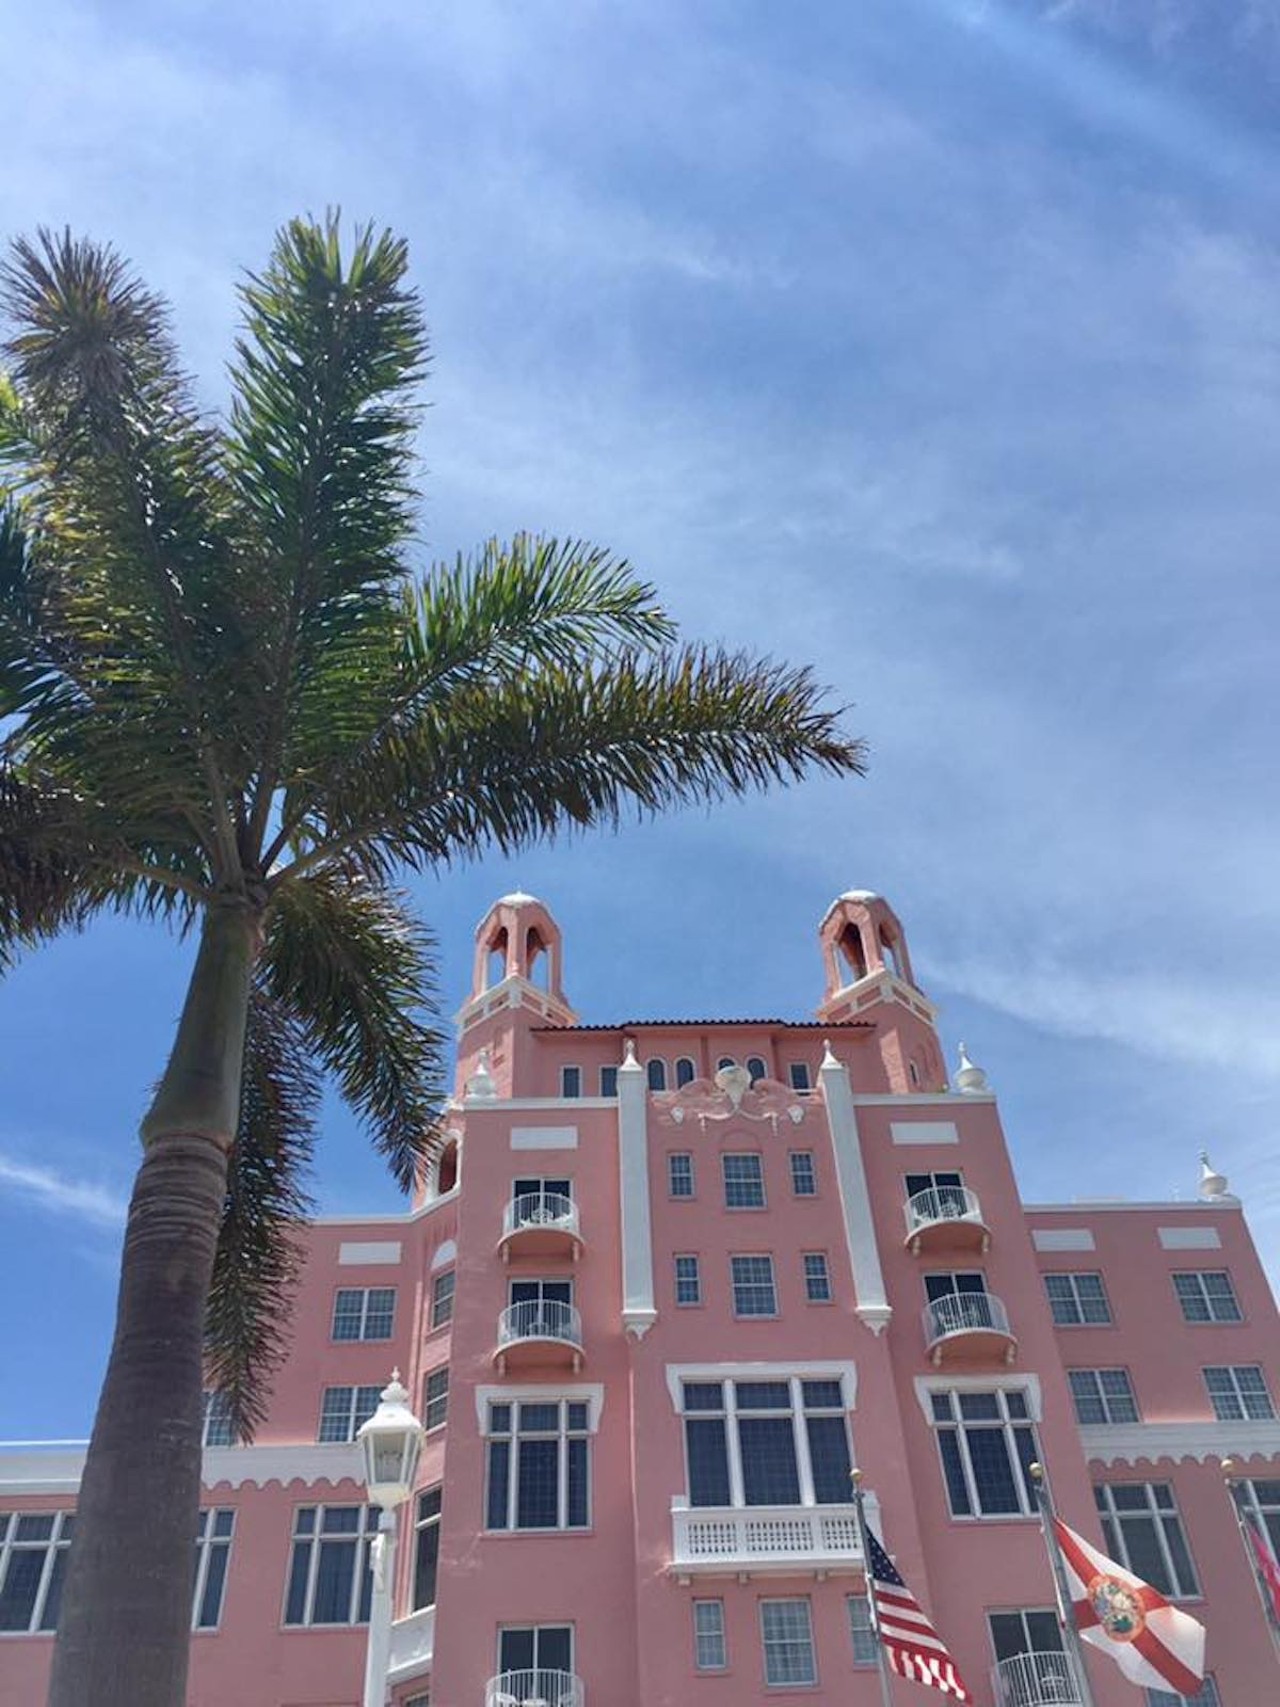 Be fancy and spend the day at the Don3400 Gulf Blvd, St. Pete Beach. (727) 360-1881 Maybe spending the night at the Don CeSar Hotel on St. Pete Beach isn't an option, so how about the day? You can get a day pass for $75 (it doesn't include parking), and spend the day by the pool, in the sauna, in fitness classes or in the steam room.